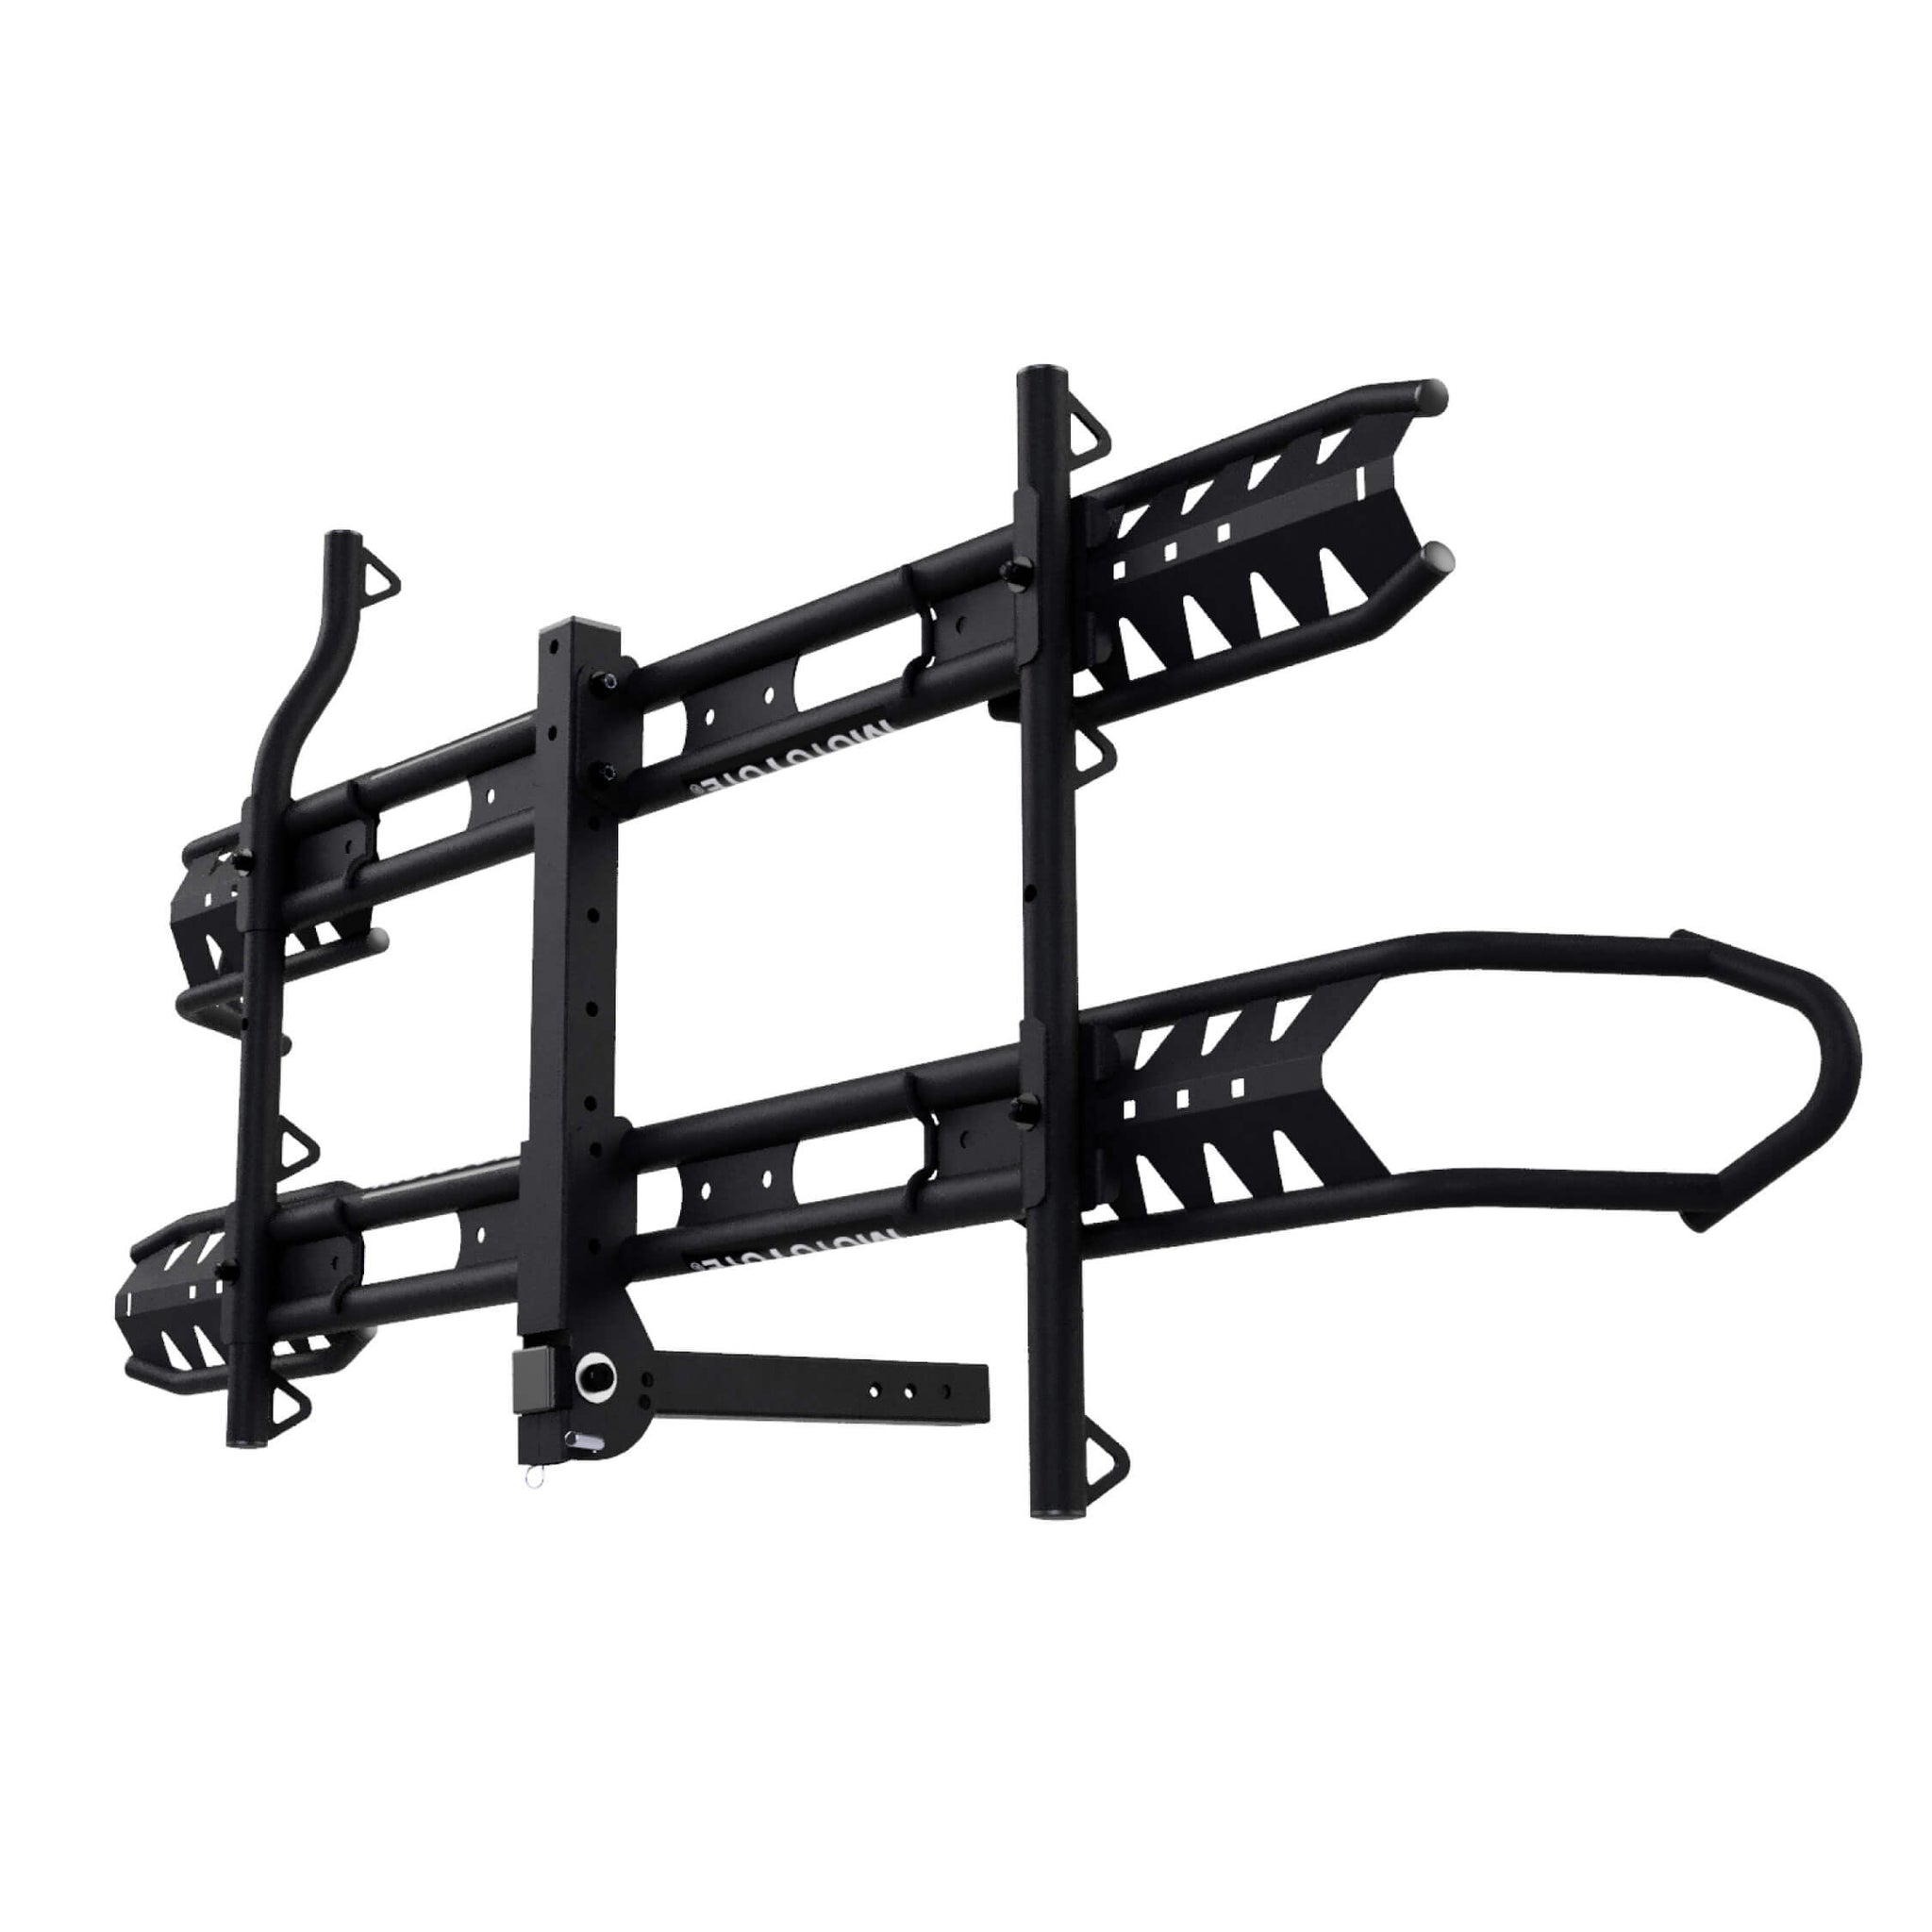 Mini Dual Bicycle Rack for E Bikes - Scratch & dent